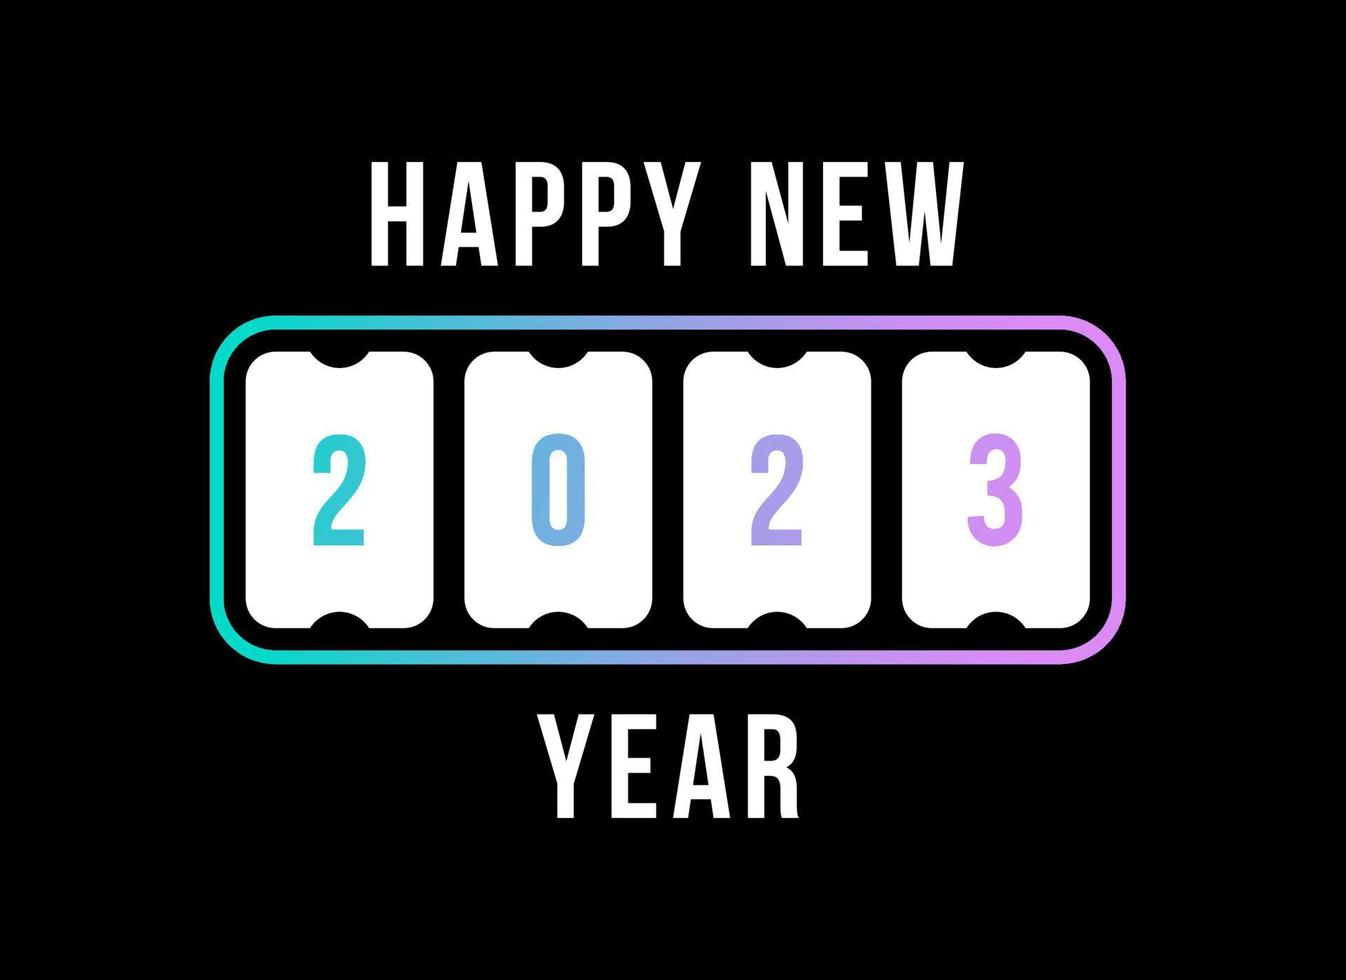 happy new year with 2023 scoreboard. concept of flipboard numerical, celebrate 2023 calendar template. flat style trend modern design vector illustration.